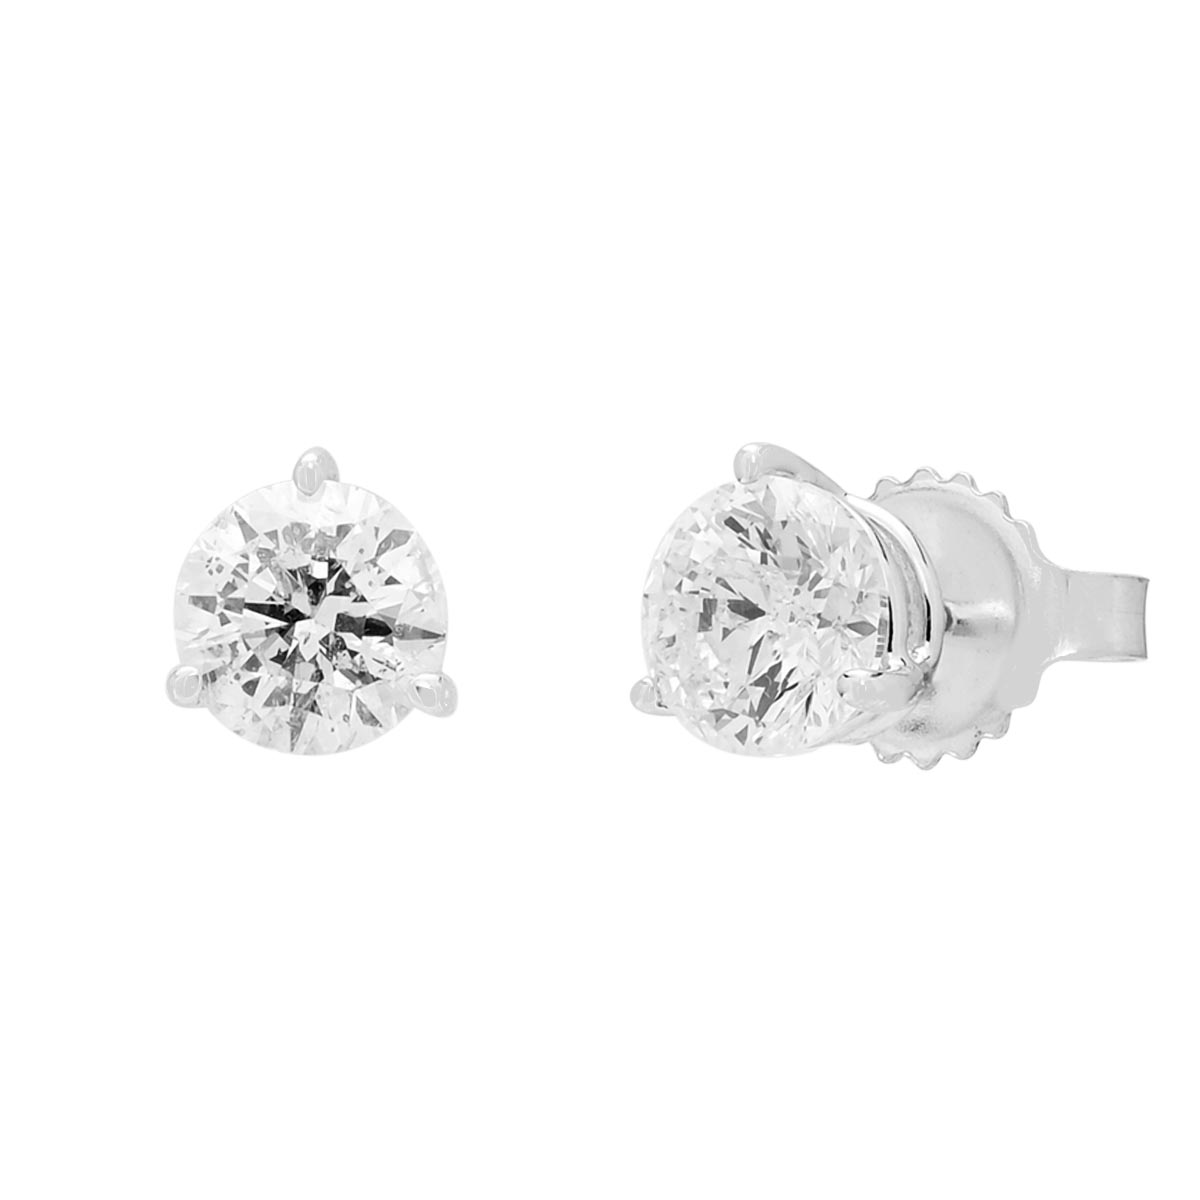 Northern Star Diamond Stud Earrings in 14kt White Gold (1 1/2ct tw)